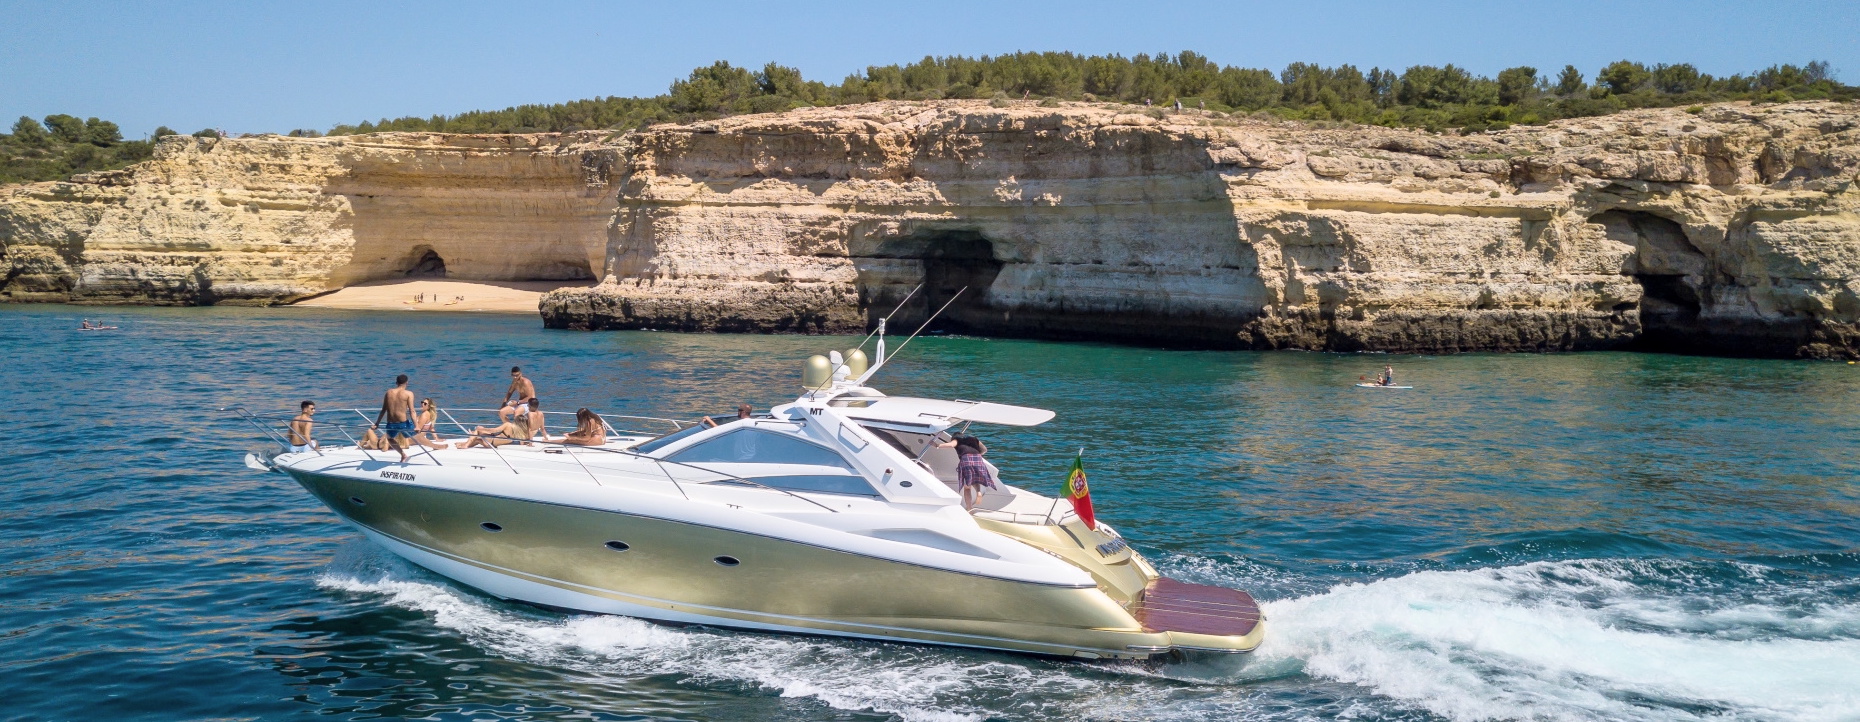 Come on board the stylish yacht in the Algarve